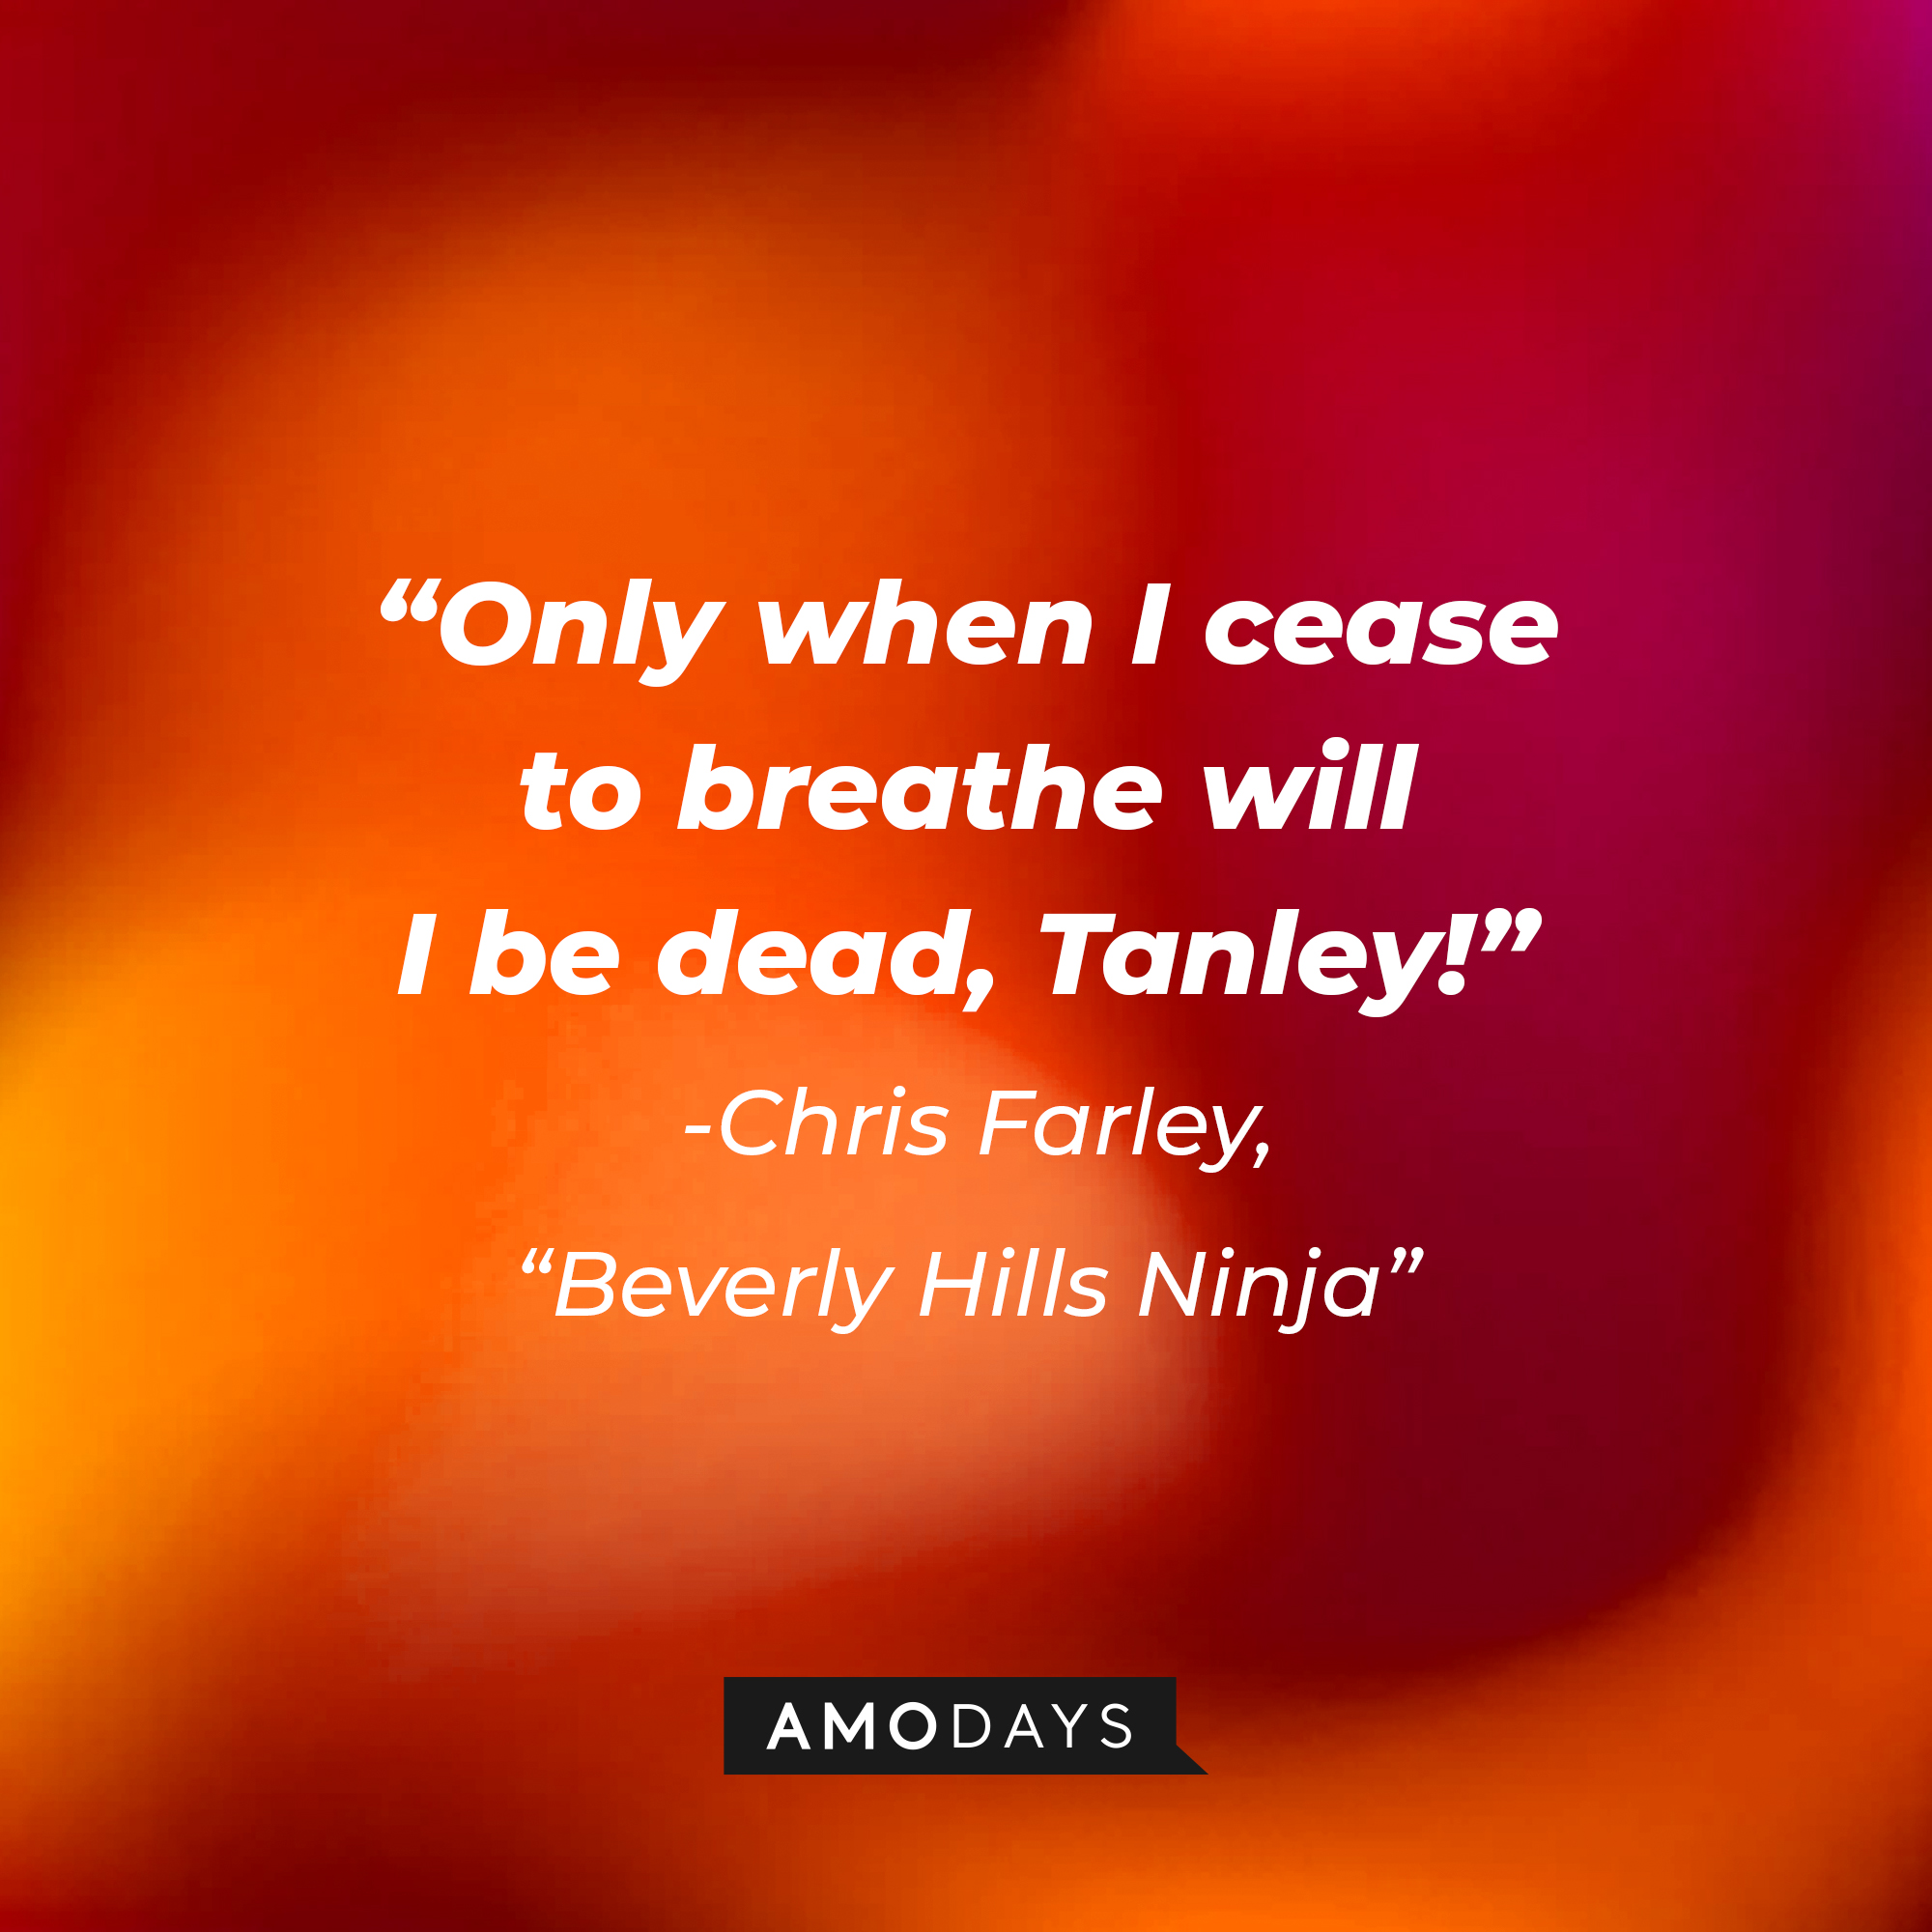 Chris Farley's “Beverly Hills Ninja" quote: “Only when I cease to breathe will I be dead, Tanley!” | Source: Amodays